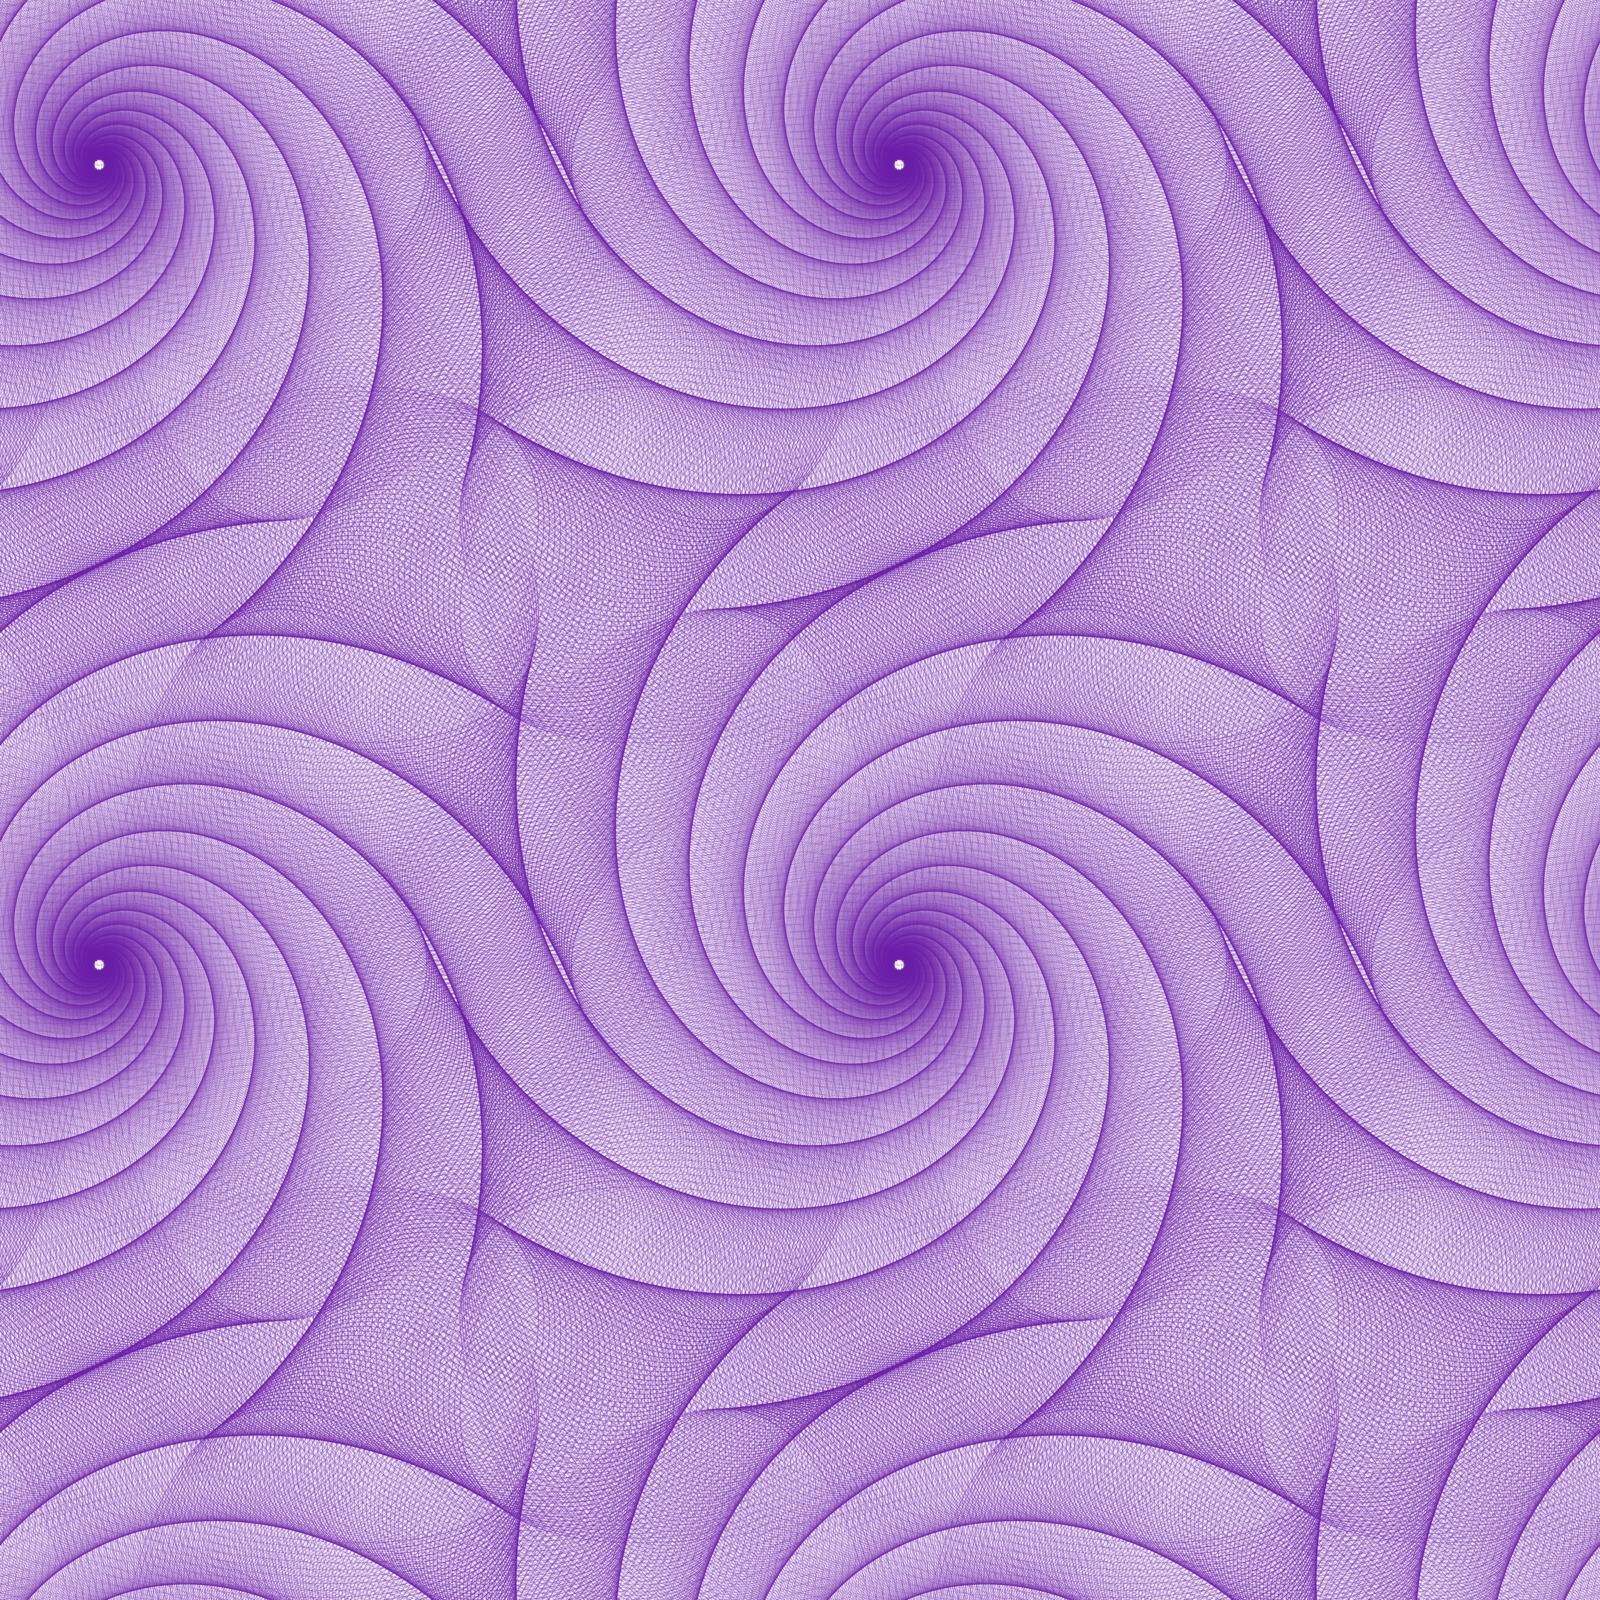 Purple abstract repeating fractal line pattern design